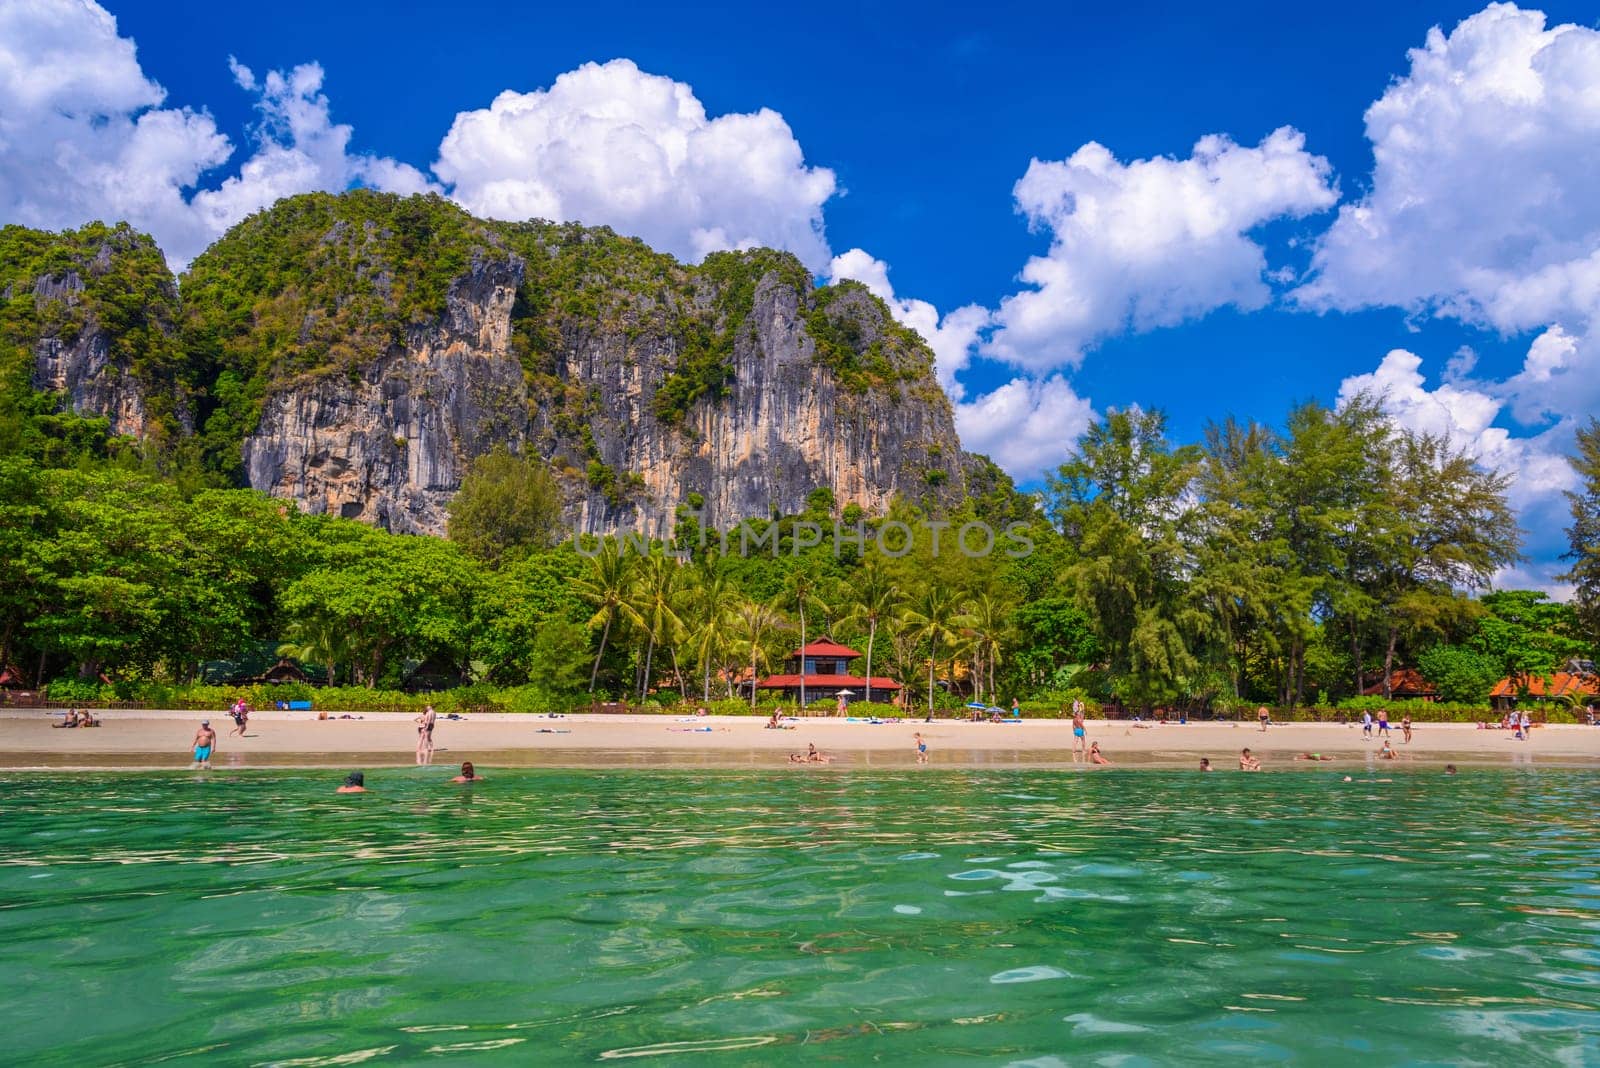 Bungalow house with red roof among coconut palms near the cliffs with people sunbathing and swimming in emerald water on Railay beach west, Ao Nang, Krabi, Thailand.